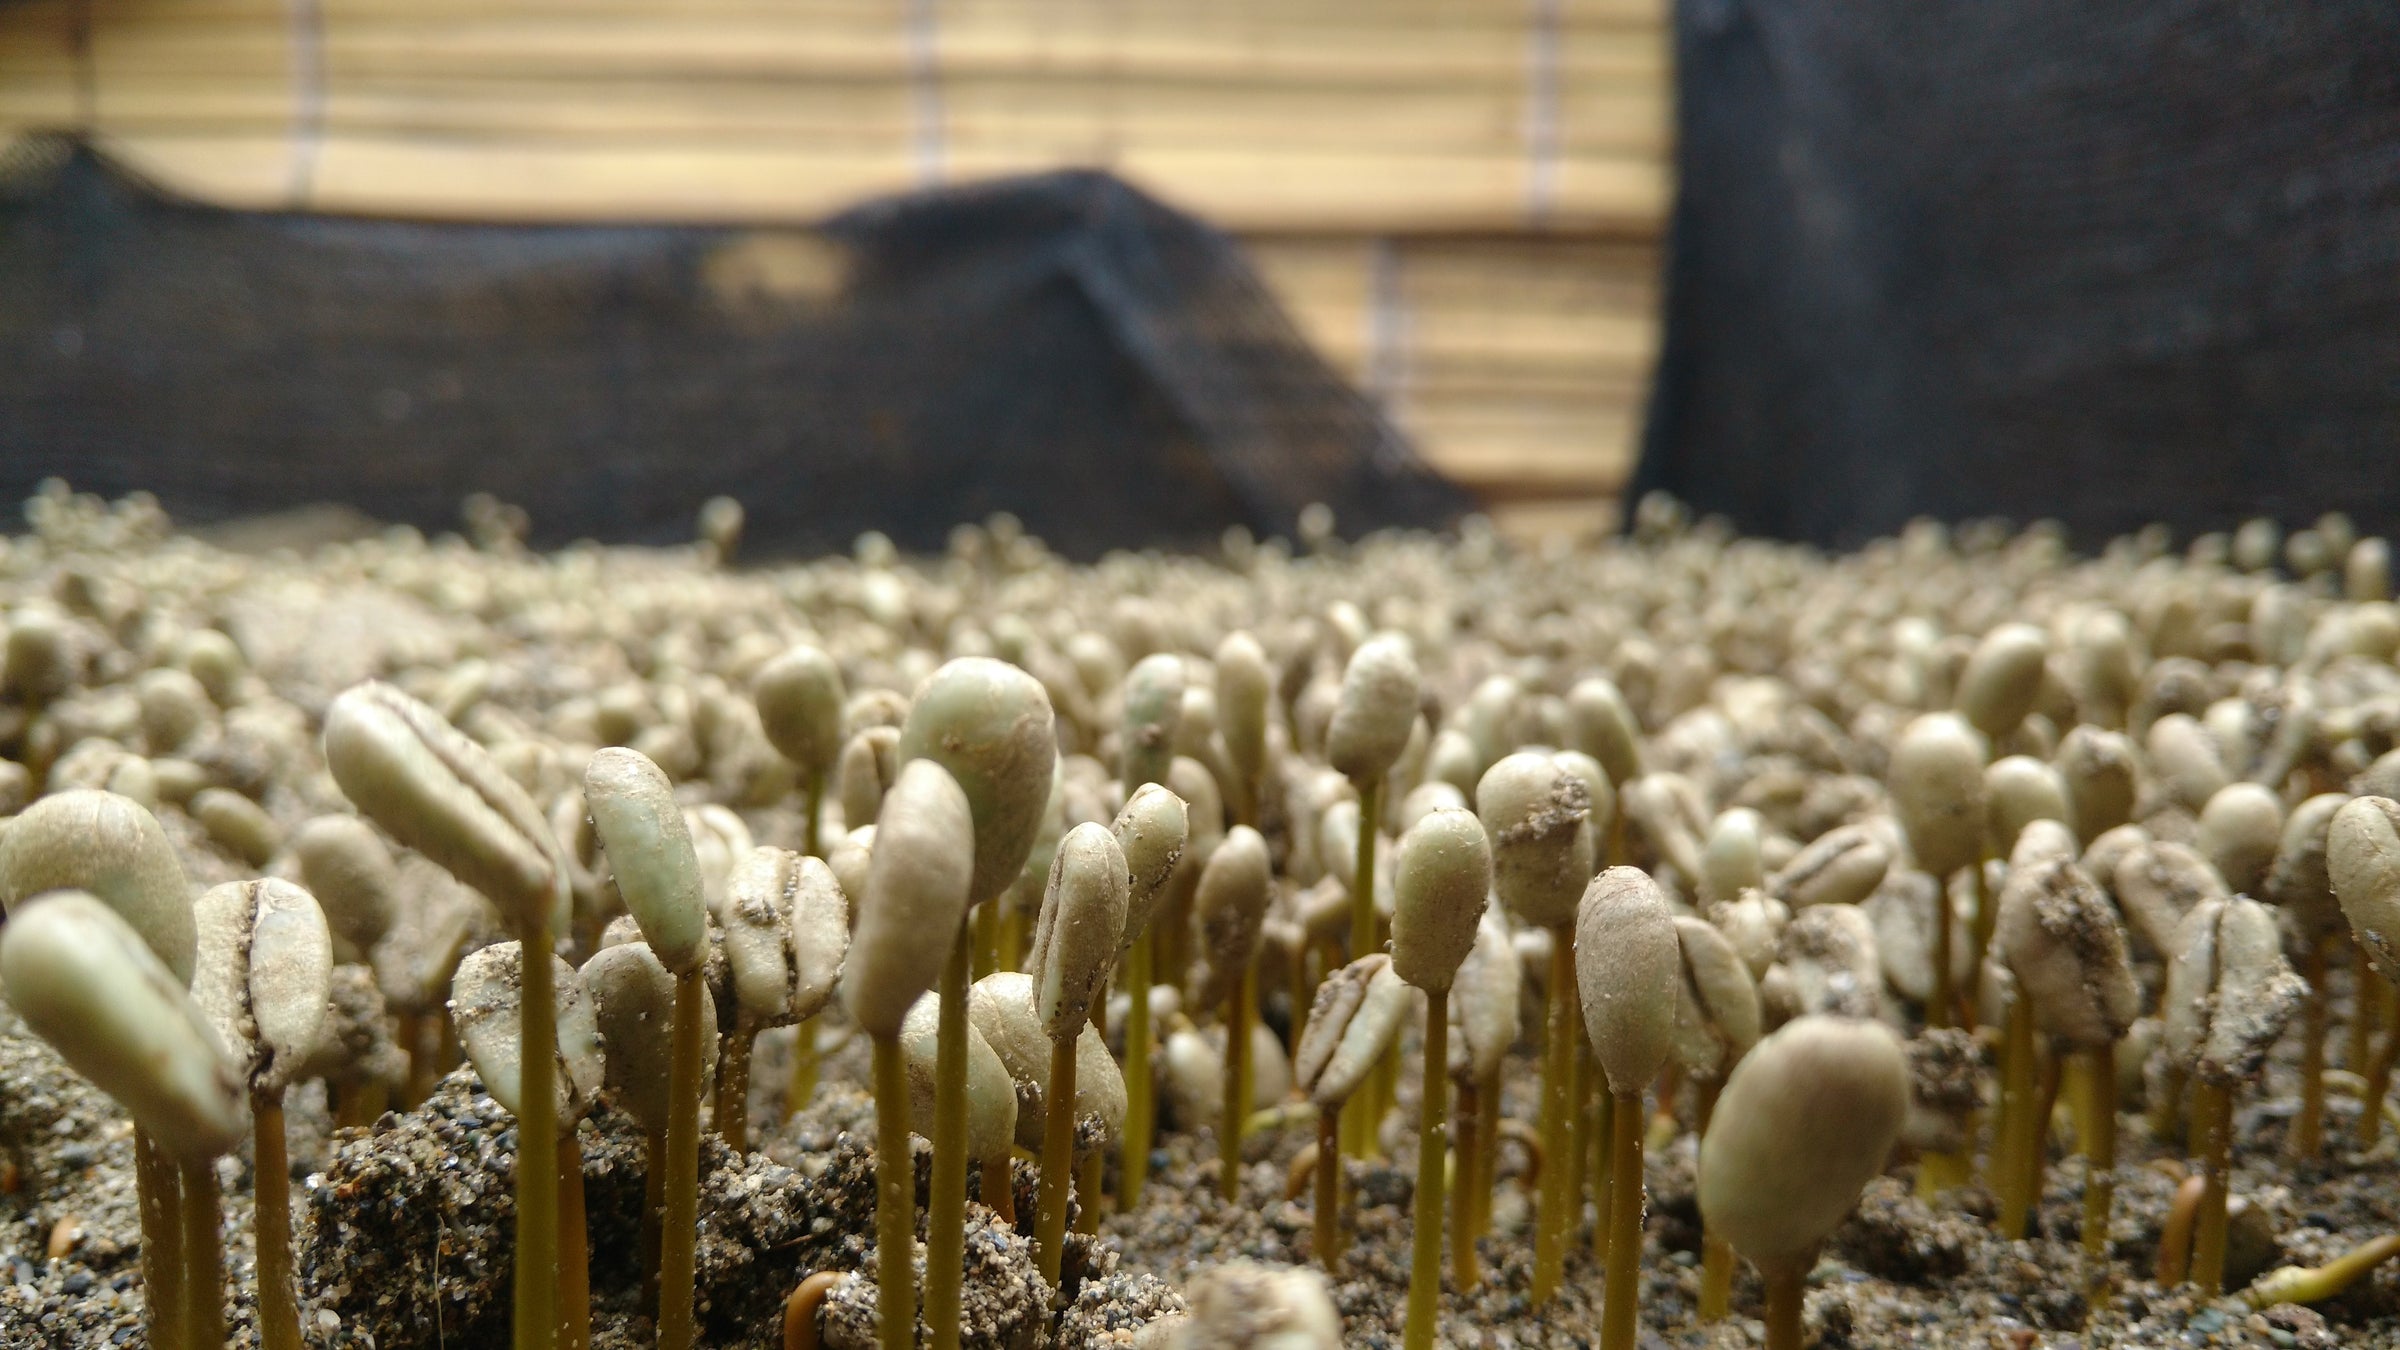 Close-up image of coffee seeds germinating and beginning to sprout.